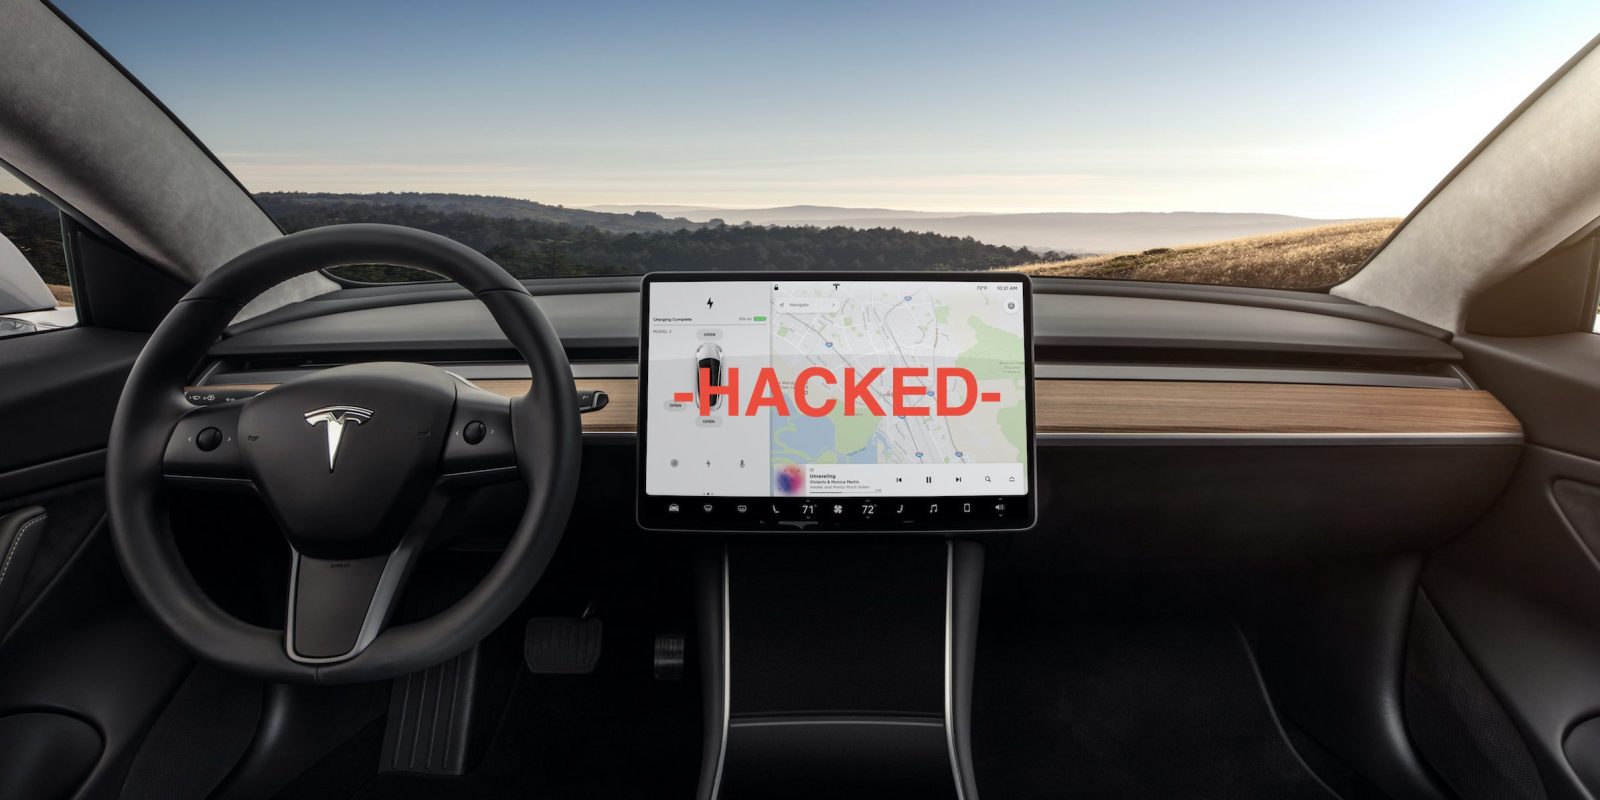 Hackers have used a gaming pad to gain access into Tesla vehicle